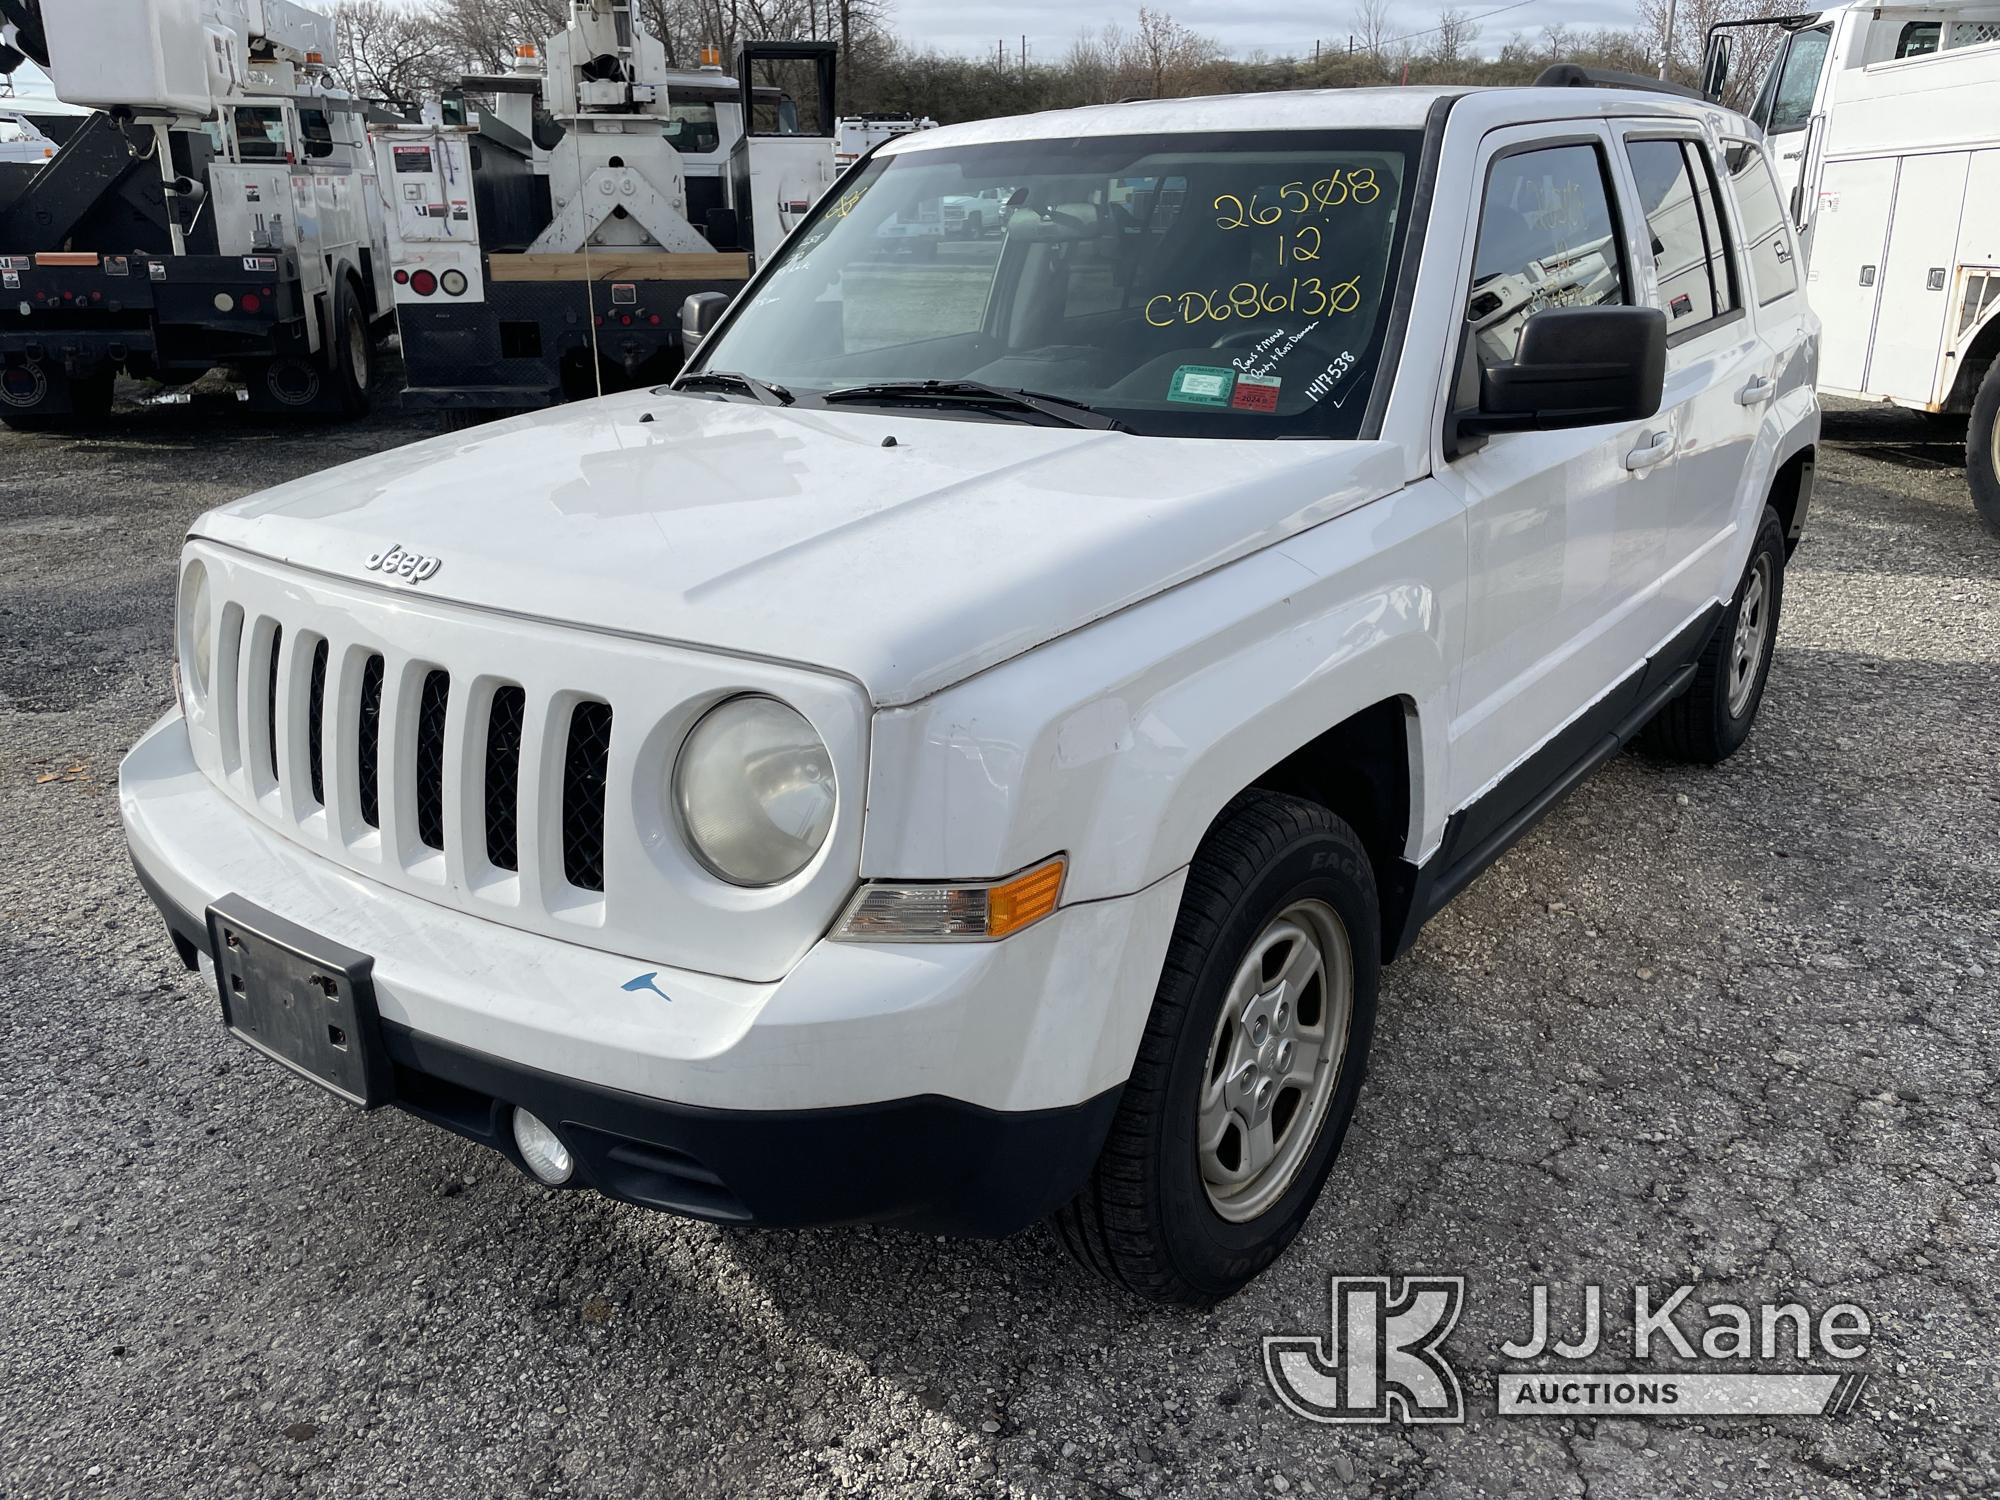 (Plymouth Meeting, PA) 2012 Jeep Patriot 4x4 4-Door Sport Utility Vehicle Runs & moves, Body & Rust